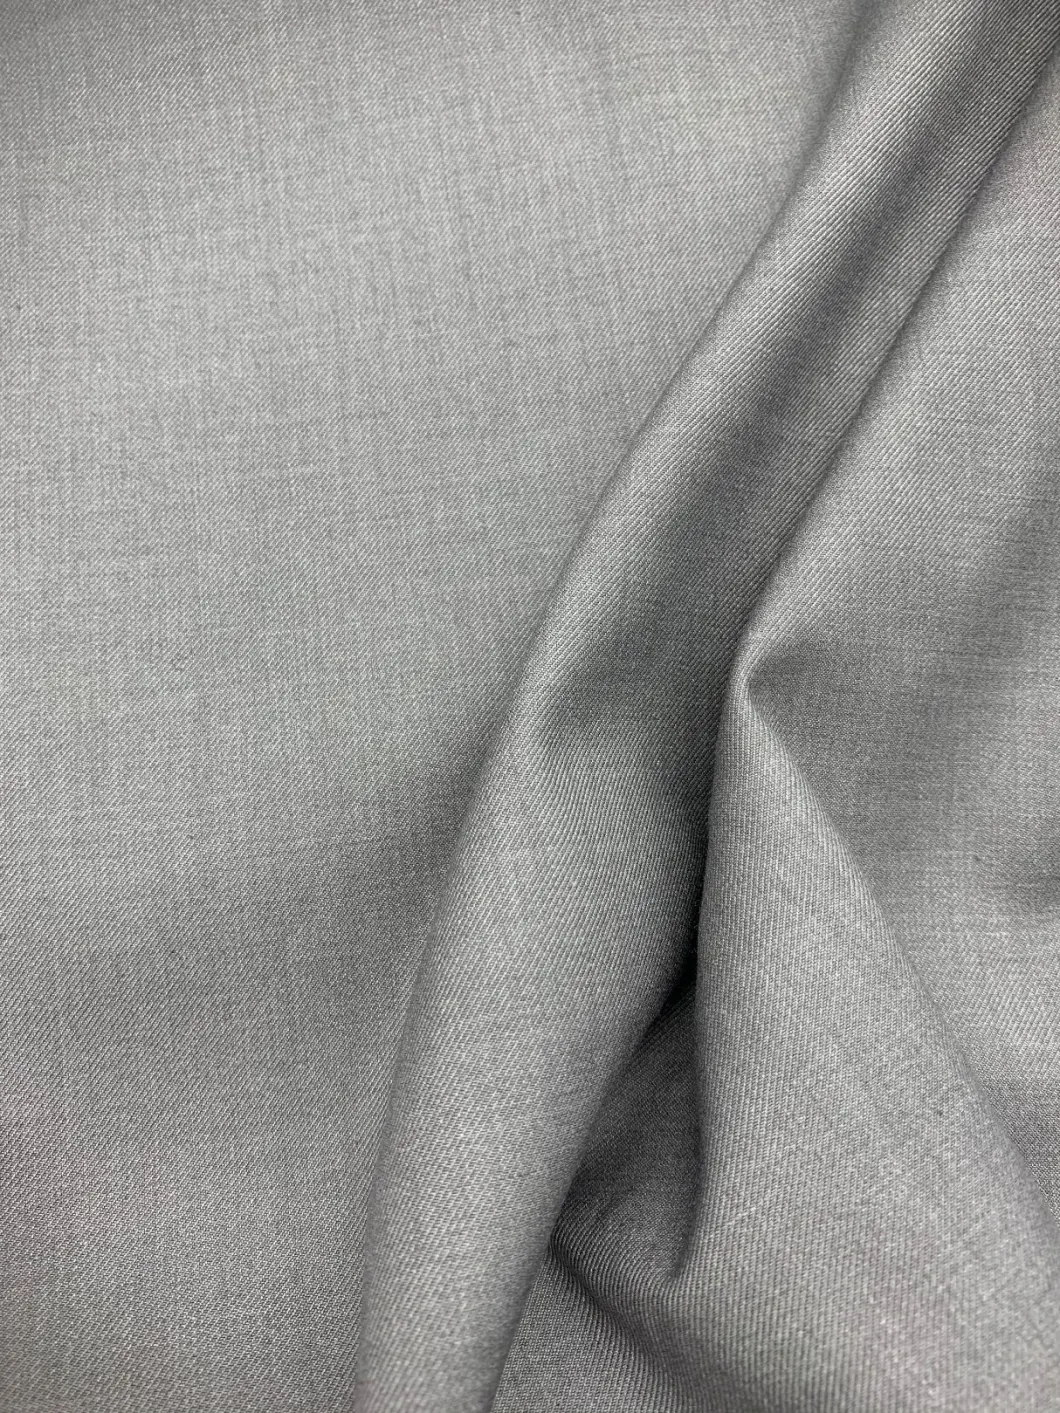 Polyester Rayon Blended Fabric Double Woven Twill Suit 4way Stretch Fabric